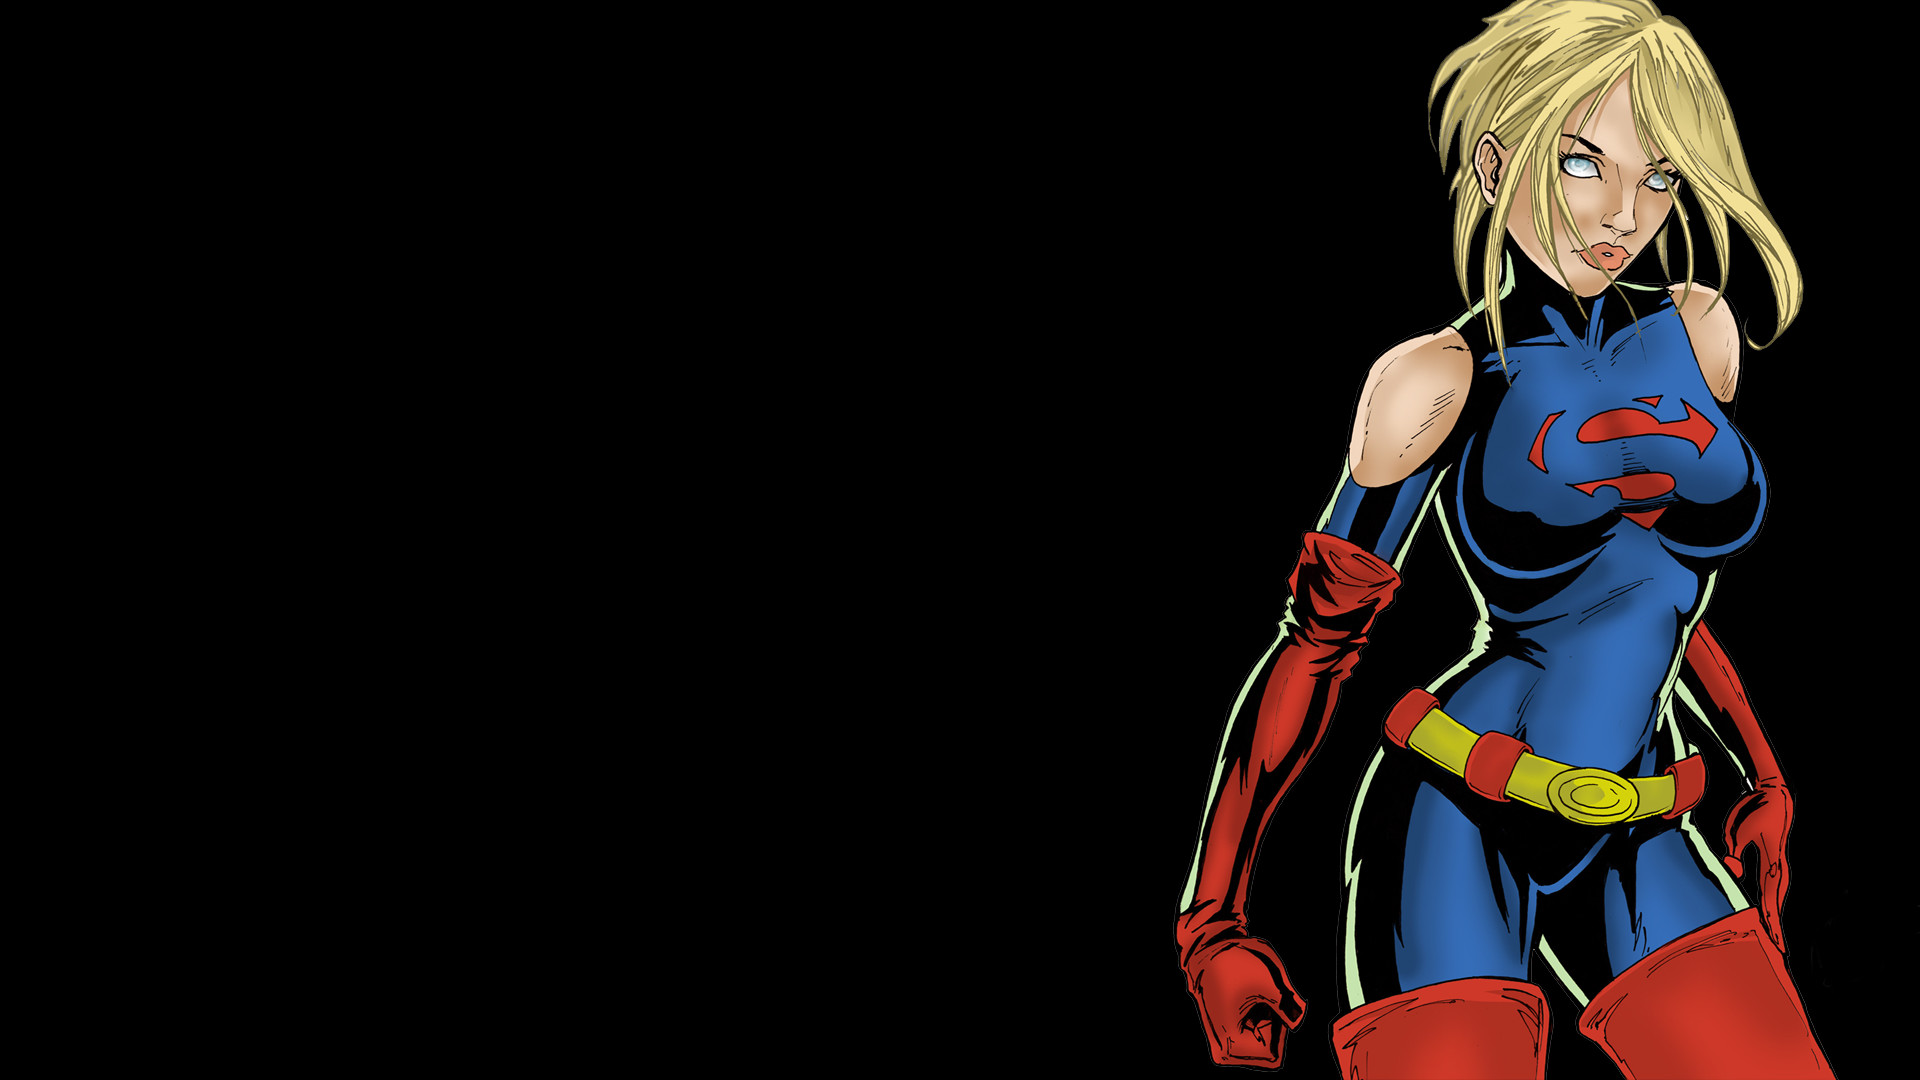 1920x1080 female superhero wallpaper group pictures(33+)